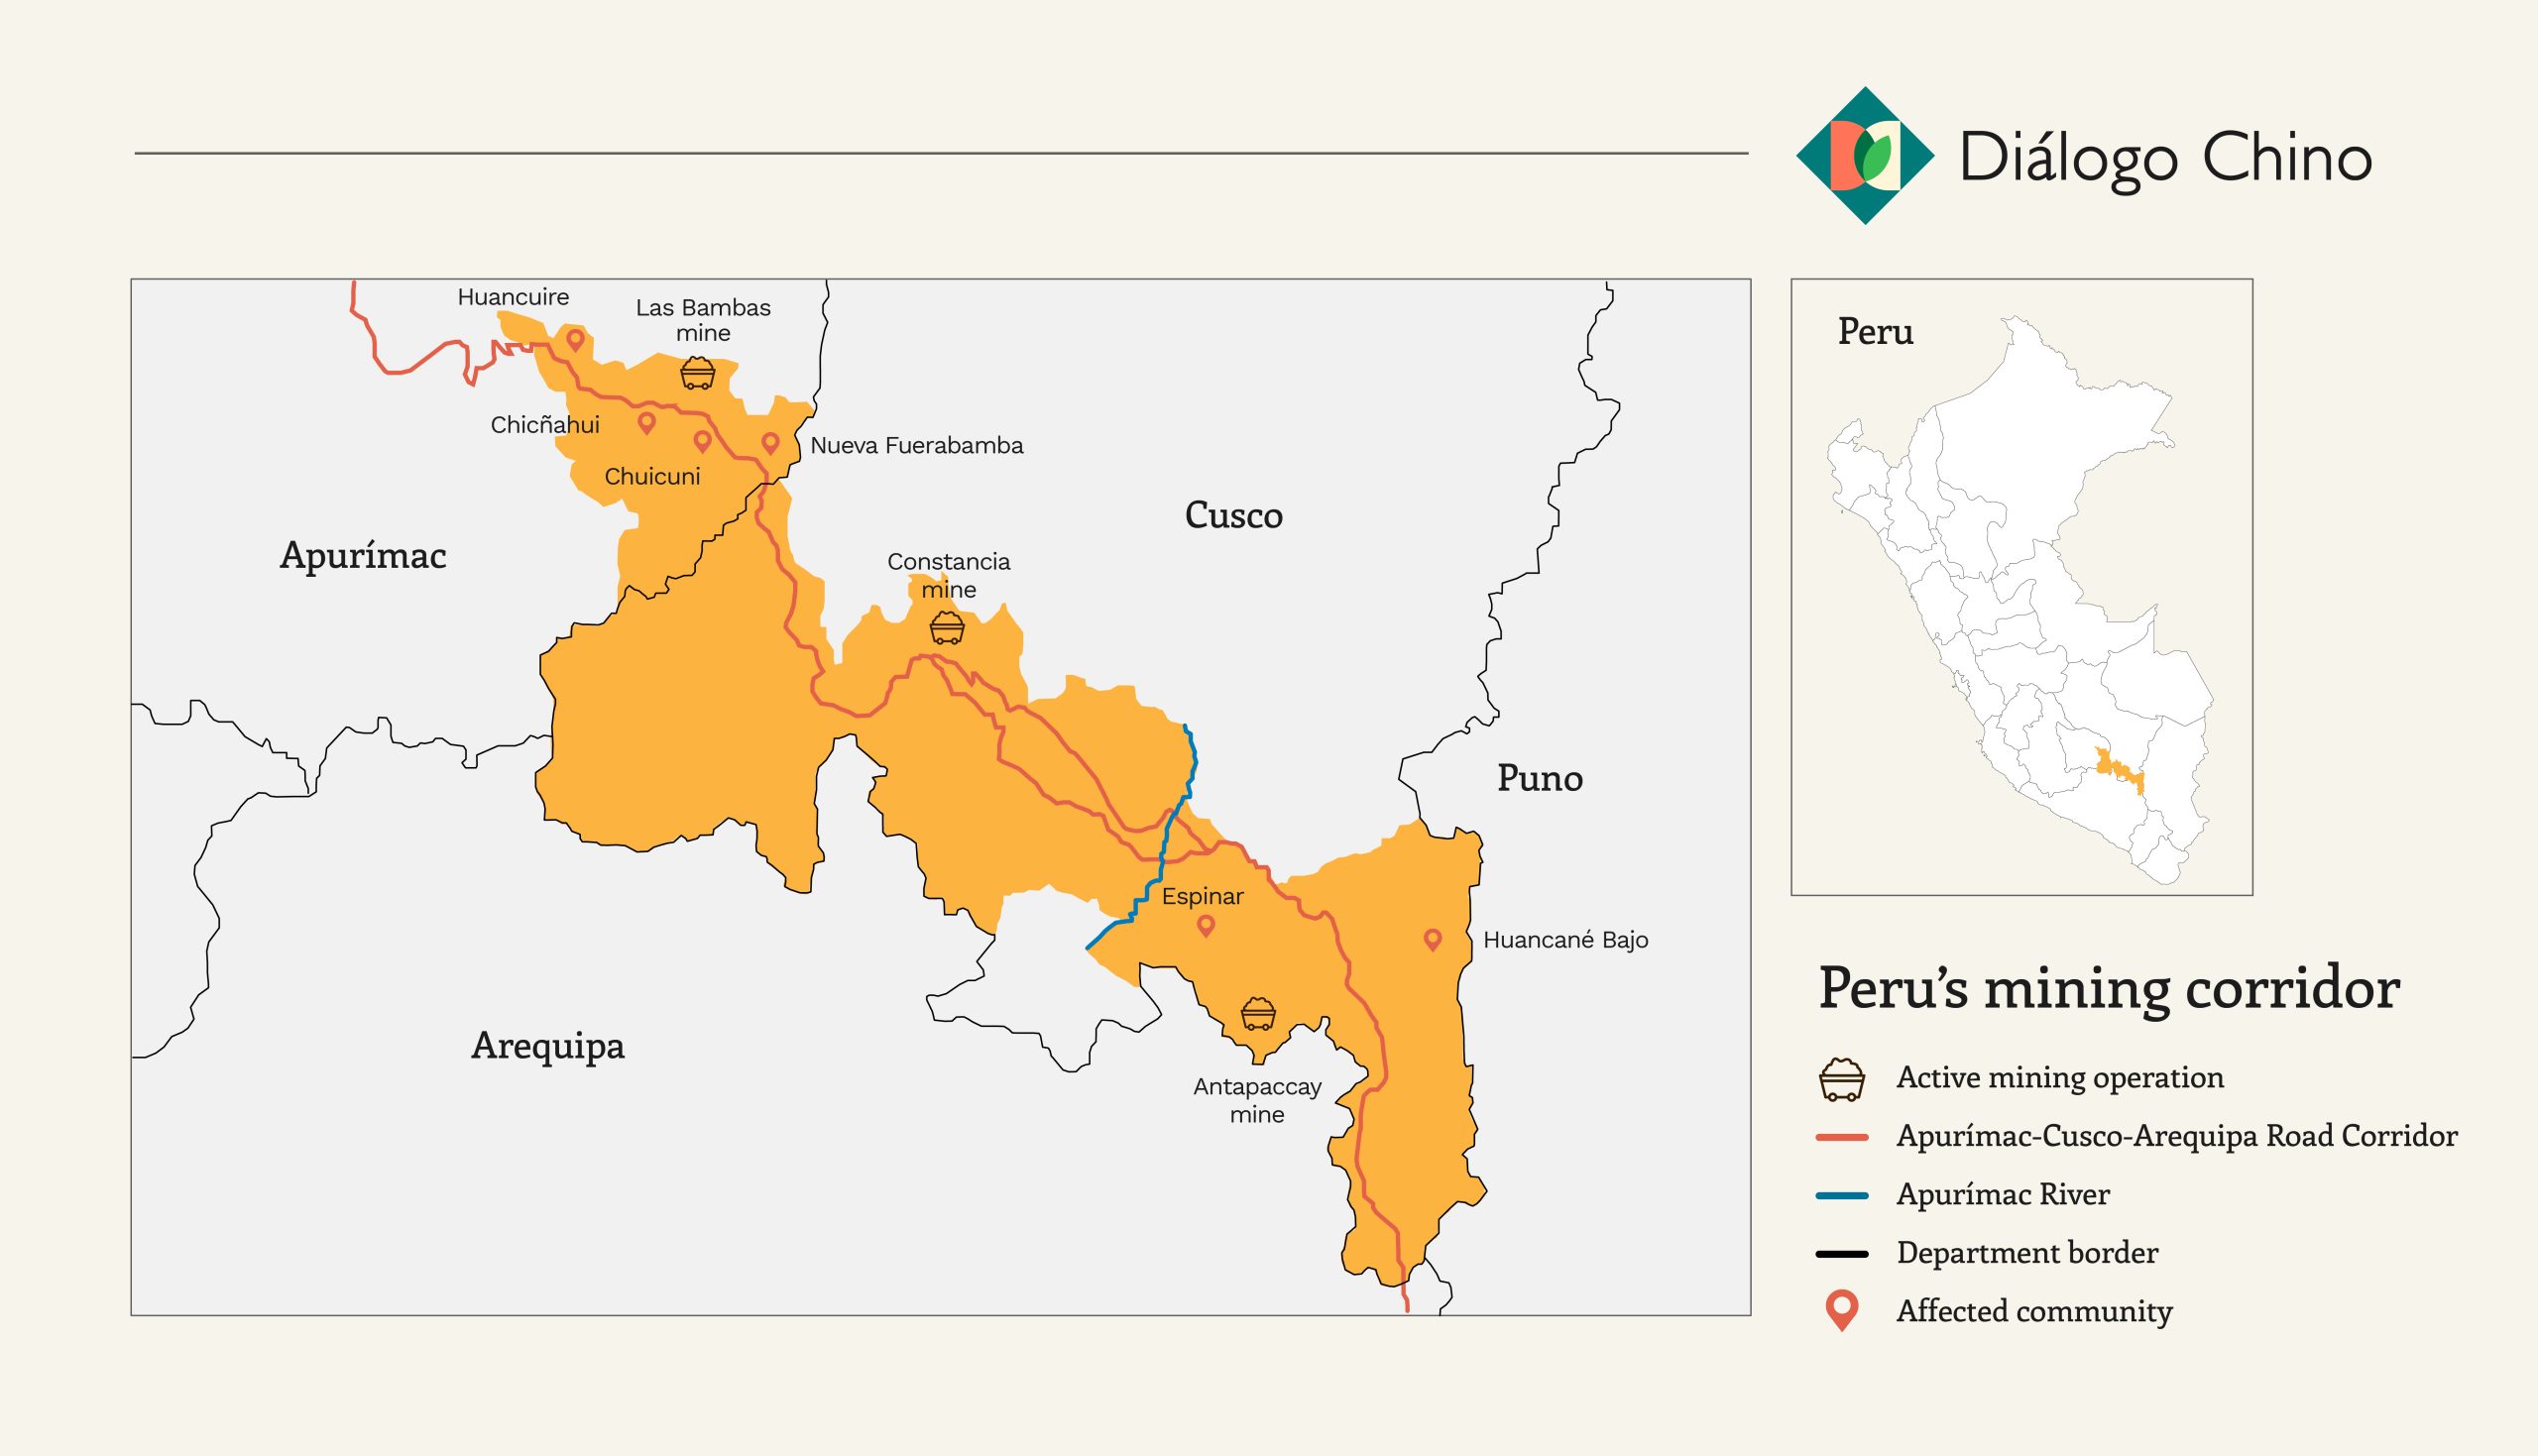 A map of Peru's "mining corridor" showing locations of key mining sites and communities affected by their operations